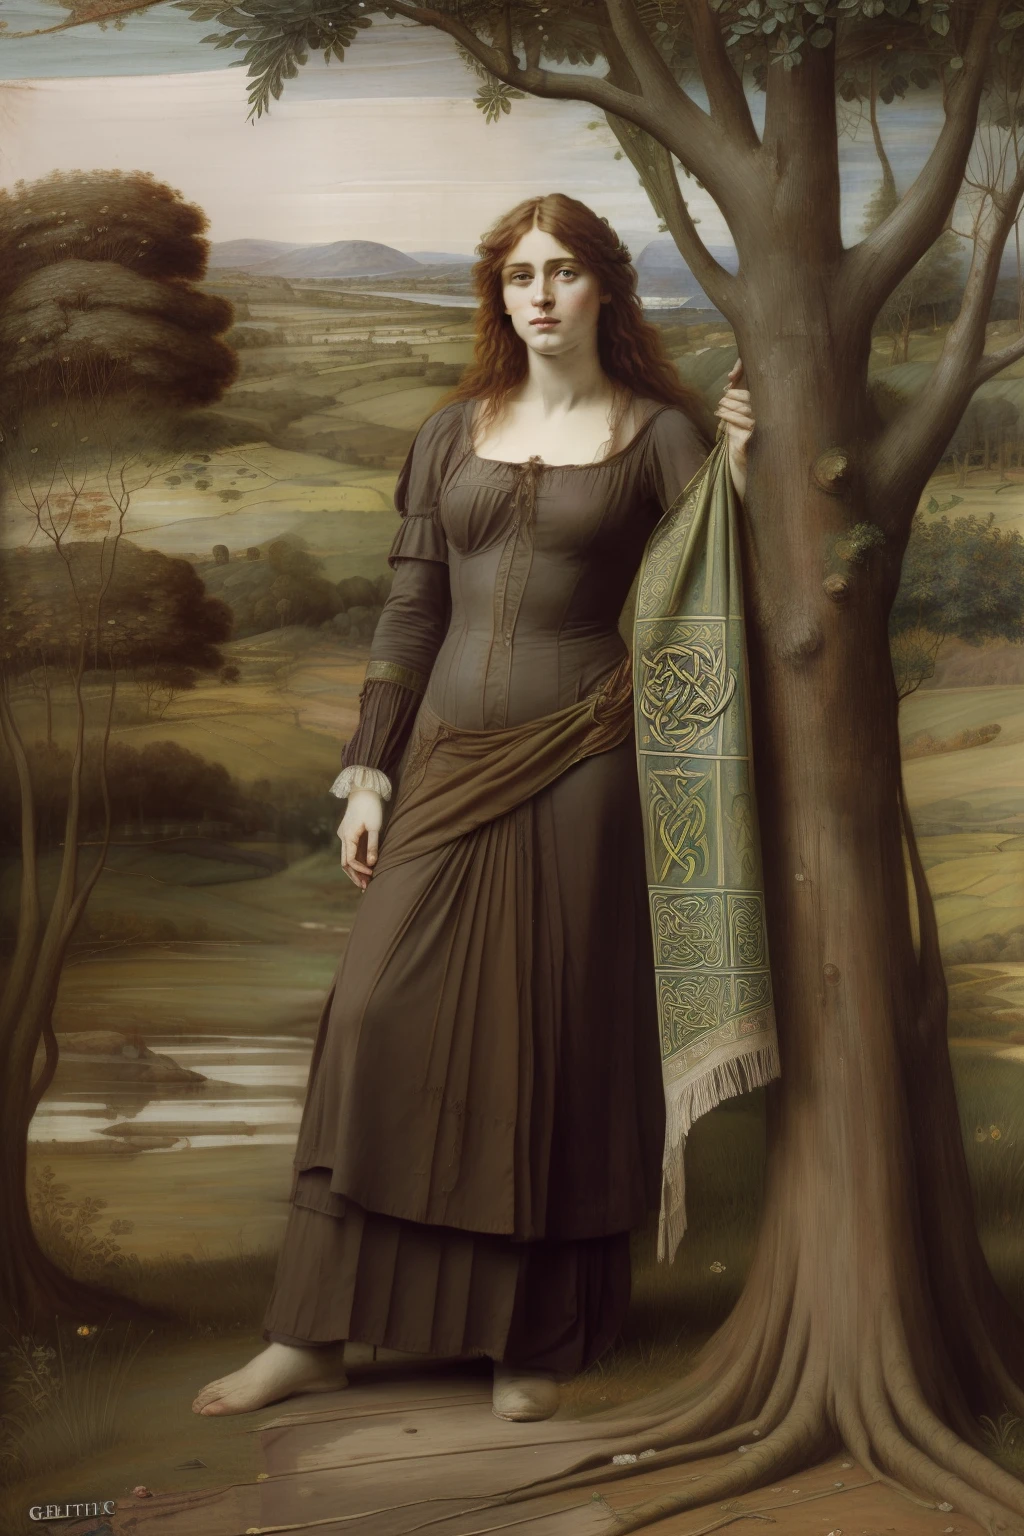 (((Pre-Raphaelite painting of poor tattered Celtic hangs a cloth from the gualet of a tree, Floresta celta)))